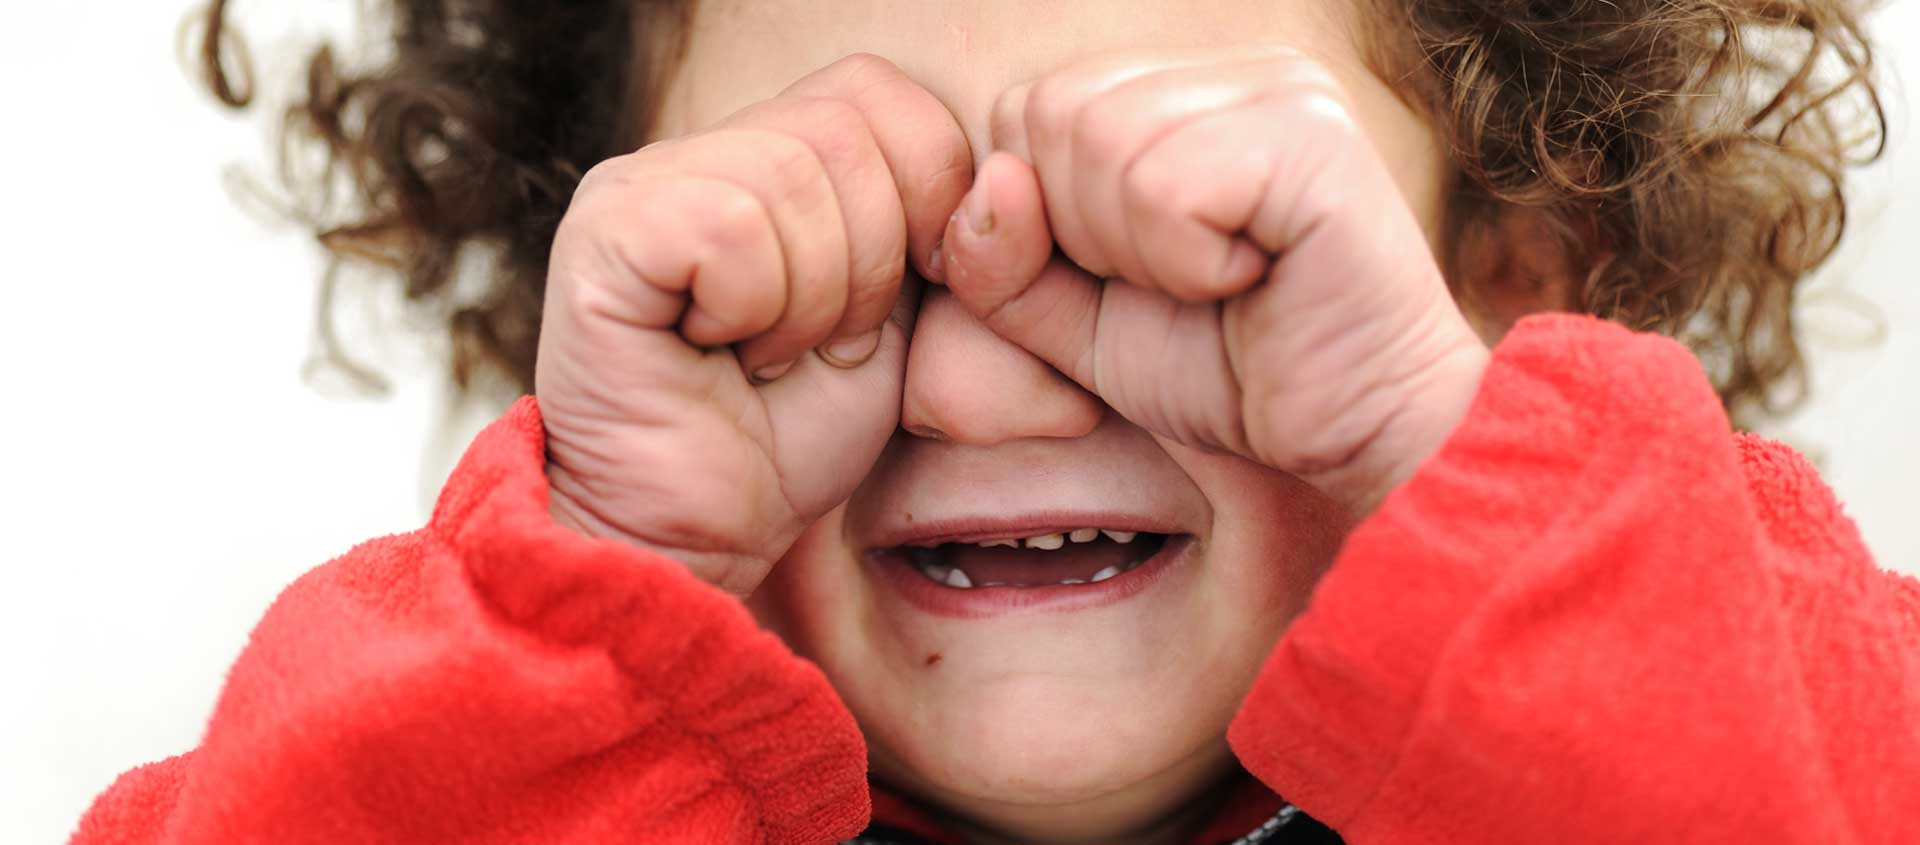 A preschool-aged child has his fists balled in his eyes and appears to be crying.